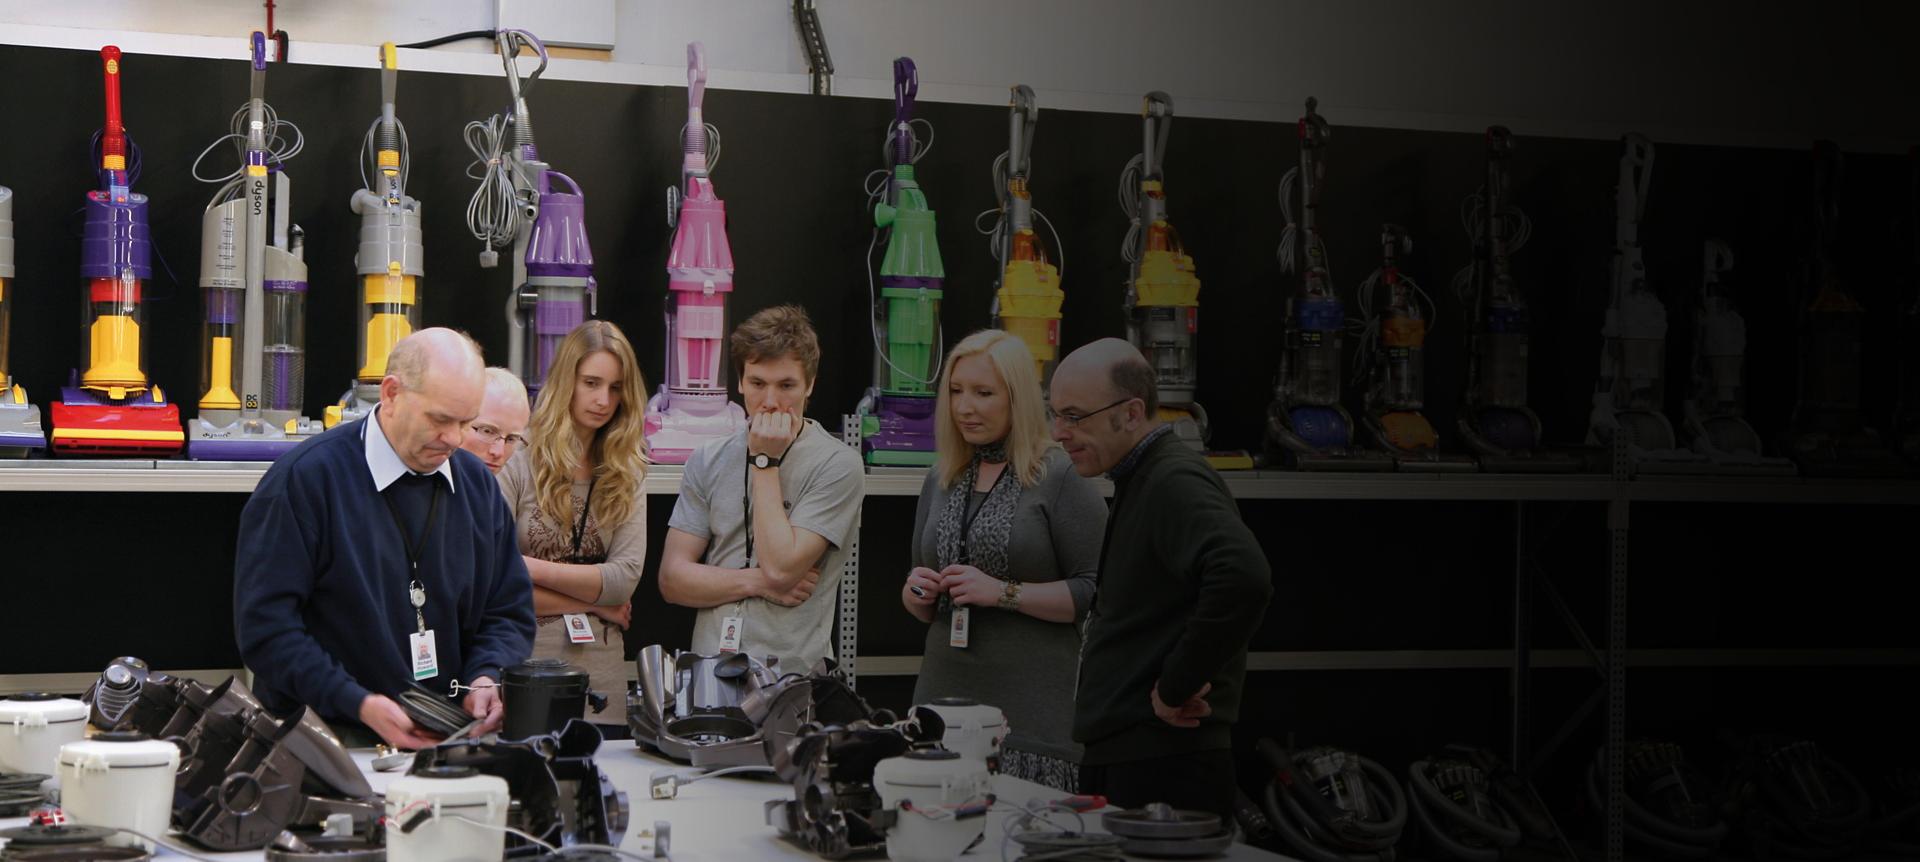 Dyson employees learning about our technology